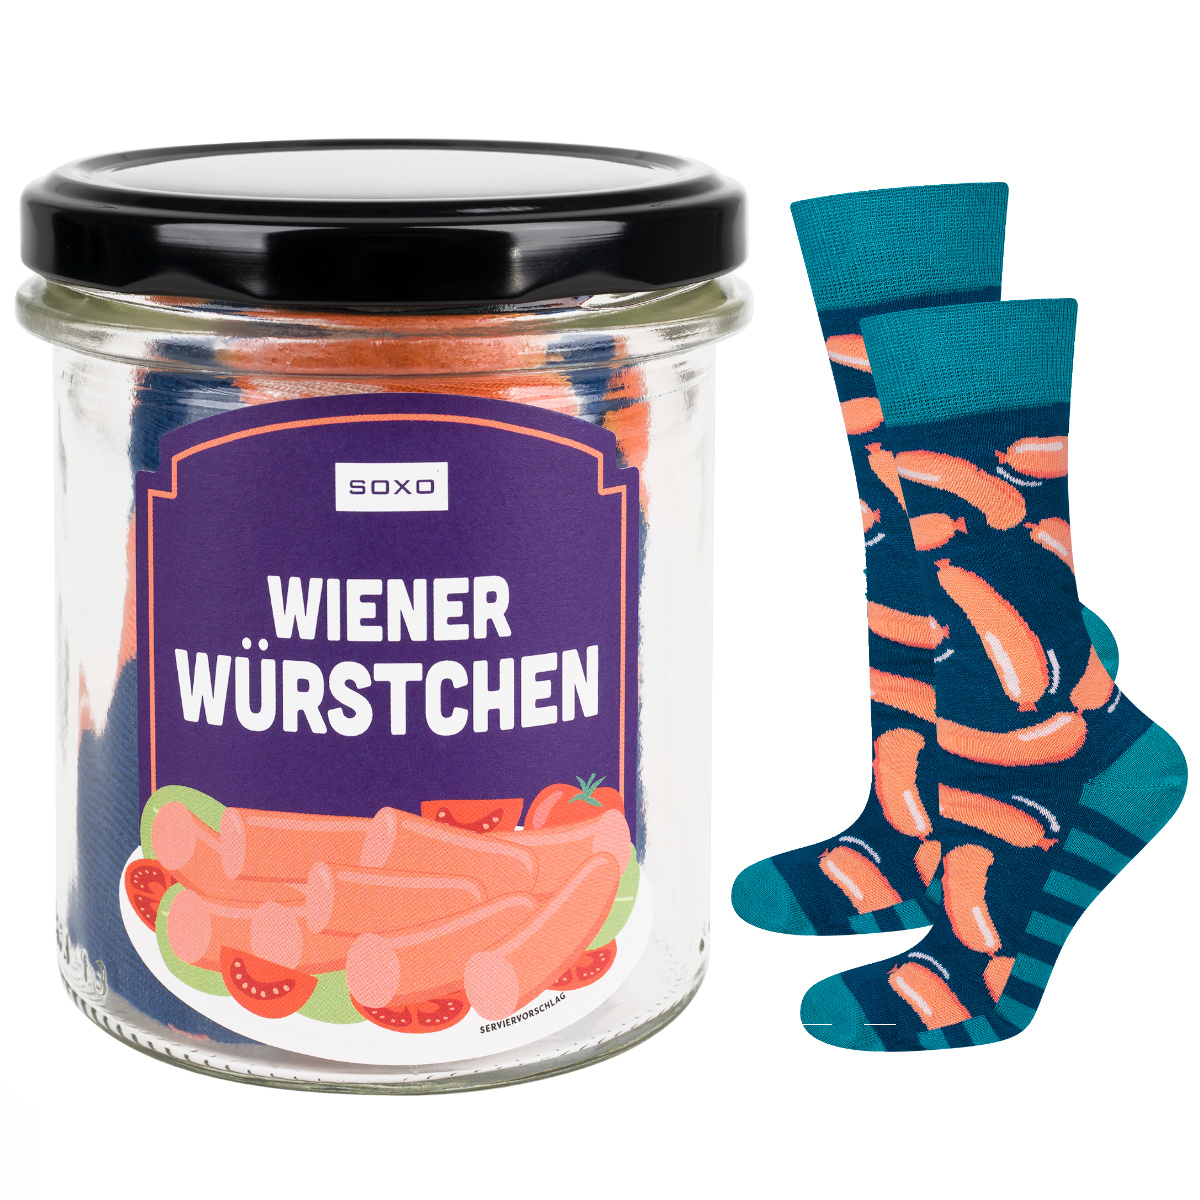 Sausage socks in a jar for Her and Him